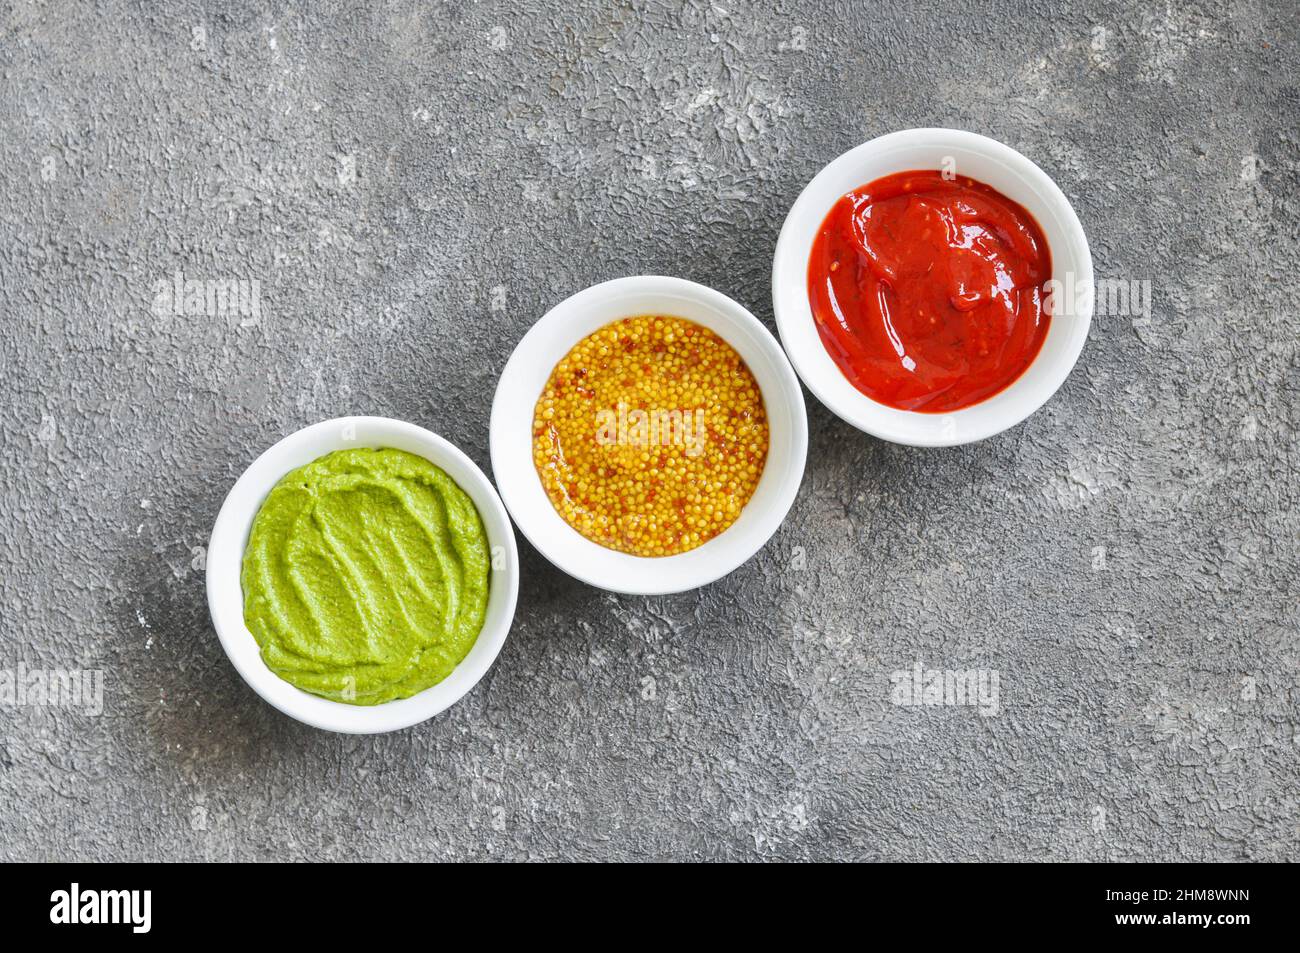 Assorted sauces, french mustard, ketchup and guacamole on a grey background. Top view. Stock Photo